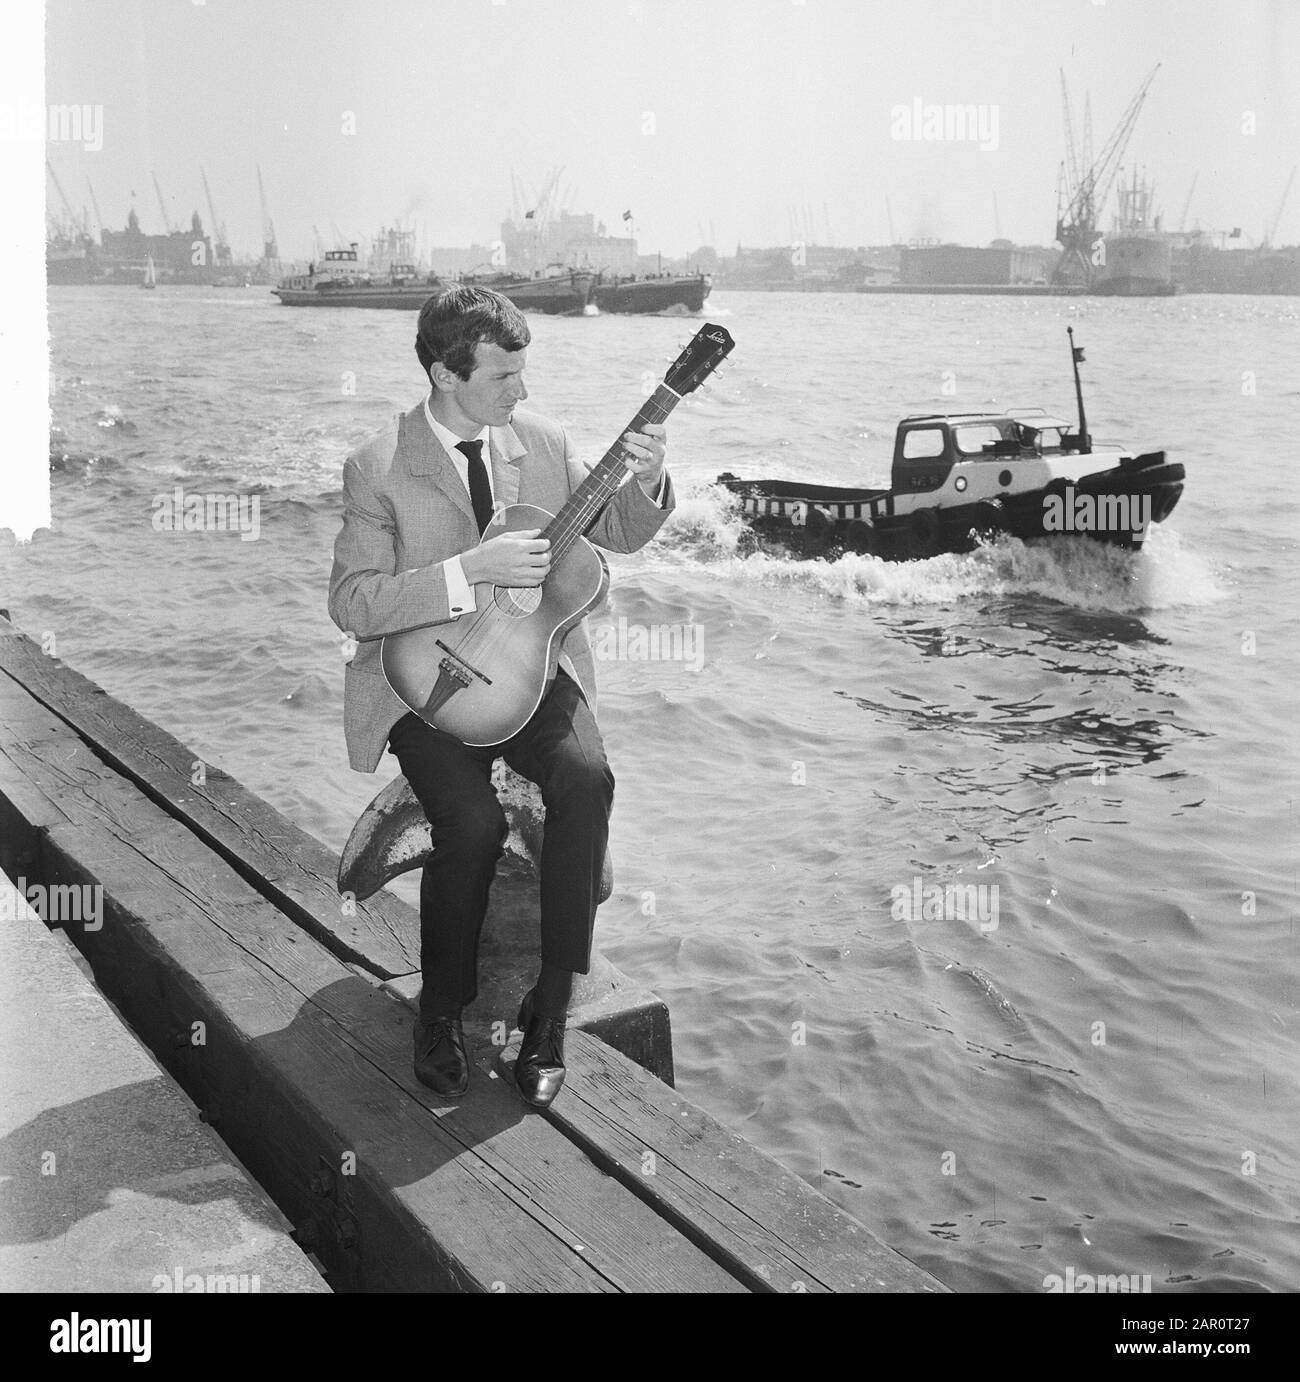 Gerard Cox in tv show of NCRV, singer Dutch chanson here at the port of Rotterdam Date: May 20, 1964 Location: Rotterdam, Zuid-Holland Keywords: TV shows, guitars, harbours, singers Personal name: Cox, Gerard Stock Photo